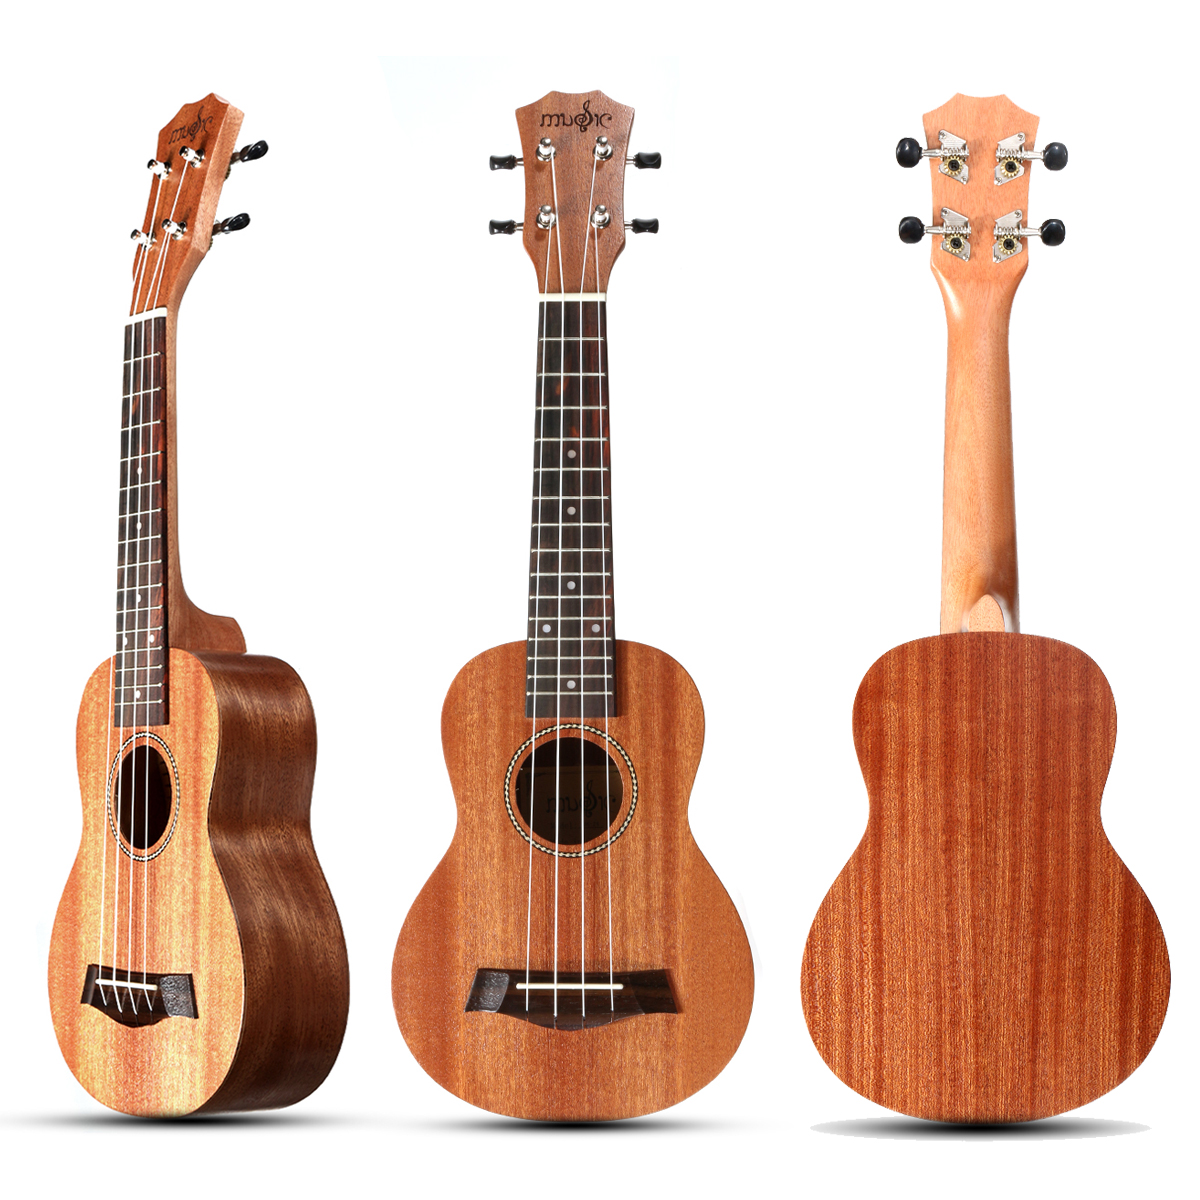 21-Inch-4-Strings-15-Frets-Wood-Color-Mahogany-Ukulele-Musical-Instrument-With-Guitar-picksRope-1510274